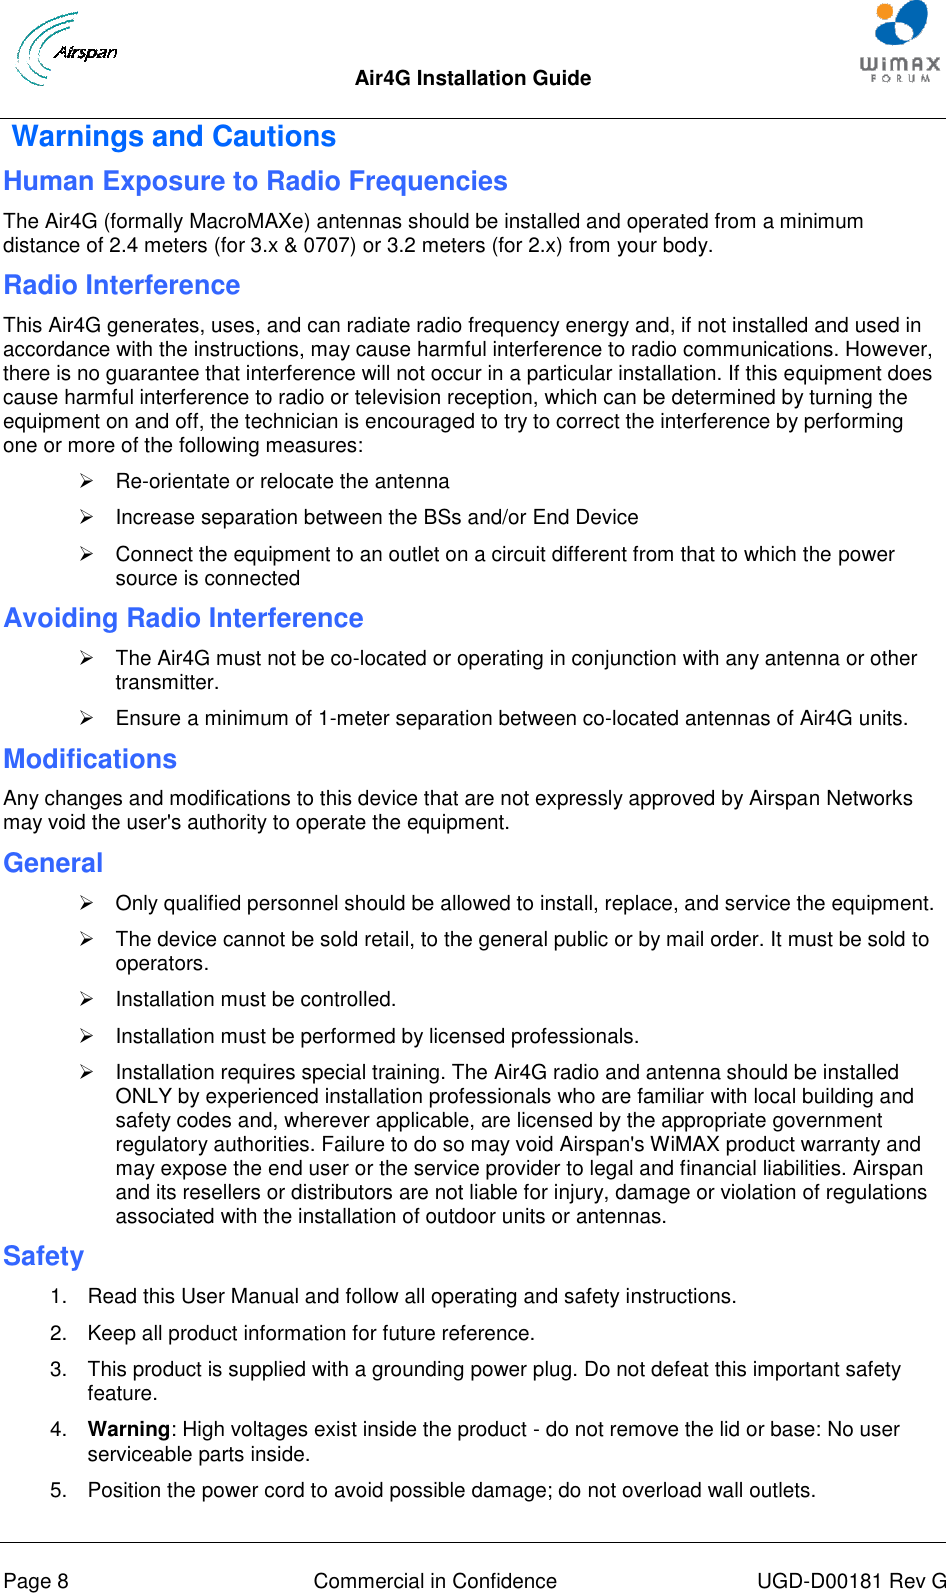  Air4G Installation Guide       Page 8  Commercial in Confidence  UGD-D00181 Rev G  Warnings and Cautions Human Exposure to Radio Frequencies The Air4G (formally MacroMAXe) antennas should be installed and operated from a minimum distance of 2.4 meters (for 3.x &amp; 0707) or 3.2 meters (for 2.x) from your body.  Radio Interference This Air4G generates, uses, and can radiate radio frequency energy and, if not installed and used in accordance with the instructions, may cause harmful interference to radio communications. However, there is no guarantee that interference will not occur in a particular installation. If this equipment does cause harmful interference to radio or television reception, which can be determined by turning the equipment on and off, the technician is encouraged to try to correct the interference by performing one or more of the following measures:  Re-orientate or relocate the antenna    Increase separation between the BSs and/or End Device   Connect the equipment to an outlet on a circuit different from that to which the power source is connected Avoiding Radio Interference    The Air4G must not be co-located or operating in conjunction with any antenna or other transmitter.    Ensure a minimum of 1-meter separation between co-located antennas of Air4G units. Modifications Any changes and modifications to this device that are not expressly approved by Airspan Networks may void the user&apos;s authority to operate the equipment. General   Only qualified personnel should be allowed to install, replace, and service the equipment.   The device cannot be sold retail, to the general public or by mail order. It must be sold to operators.   Installation must be controlled.   Installation must be performed by licensed professionals.   Installation requires special training. The Air4G radio and antenna should be installed ONLY by experienced installation professionals who are familiar with local building and safety codes and, wherever applicable, are licensed by the appropriate government regulatory authorities. Failure to do so may void Airspan&apos;s WiMAX product warranty and may expose the end user or the service provider to legal and financial liabilities. Airspan and its resellers or distributors are not liable for injury, damage or violation of regulations associated with the installation of outdoor units or antennas. Safety  1.  Read this User Manual and follow all operating and safety instructions. 2.  Keep all product information for future reference. 3.  This product is supplied with a grounding power plug. Do not defeat this important safety feature. 4.  Warning: High voltages exist inside the product - do not remove the lid or base: No user serviceable parts inside. 5.  Position the power cord to avoid possible damage; do not overload wall outlets. 